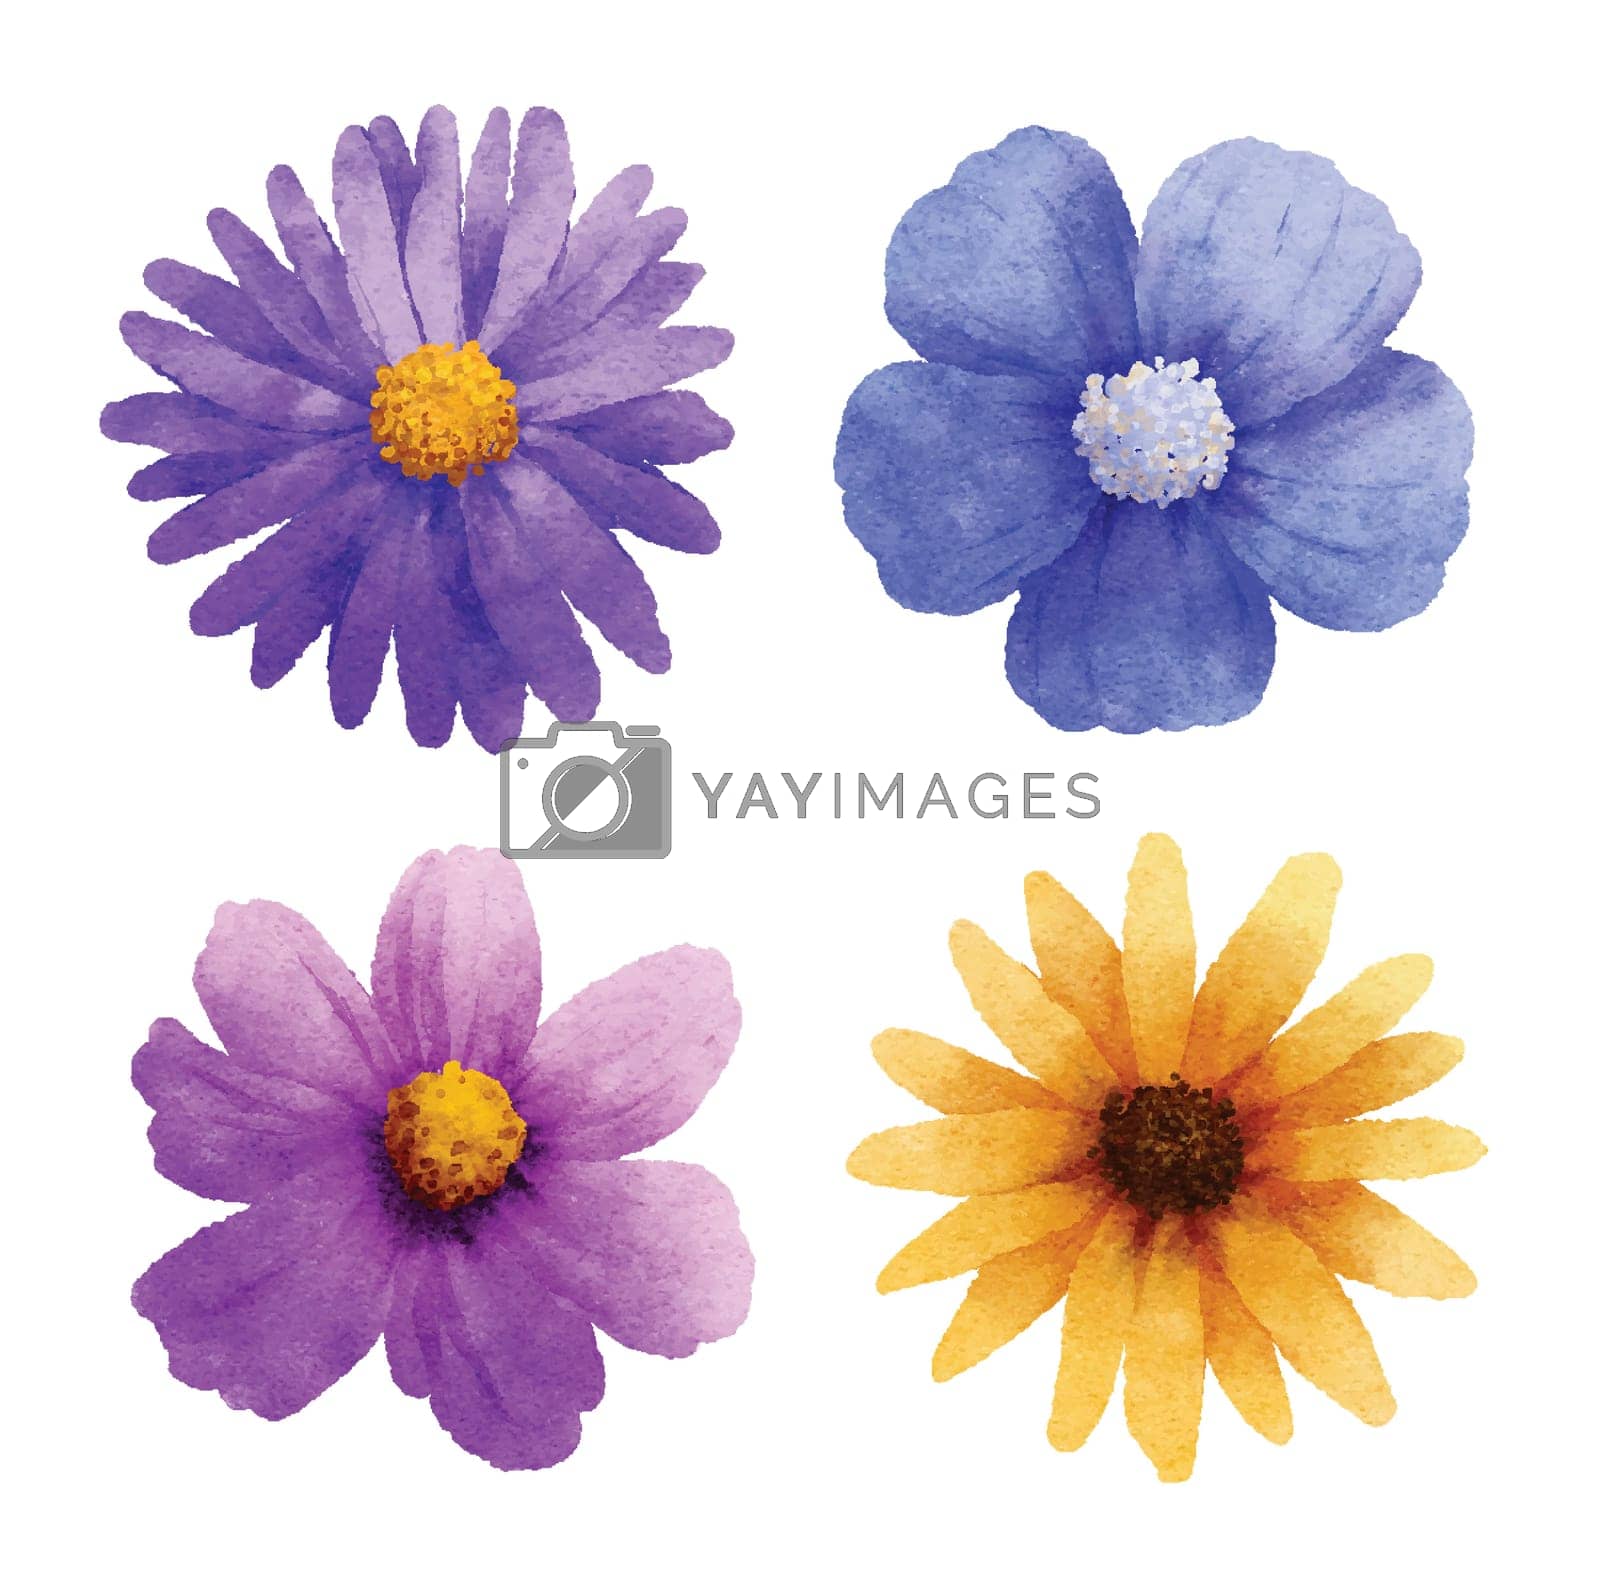 Royalty free image of Flowers set in watercolor style isolated on white background. by kaisorn